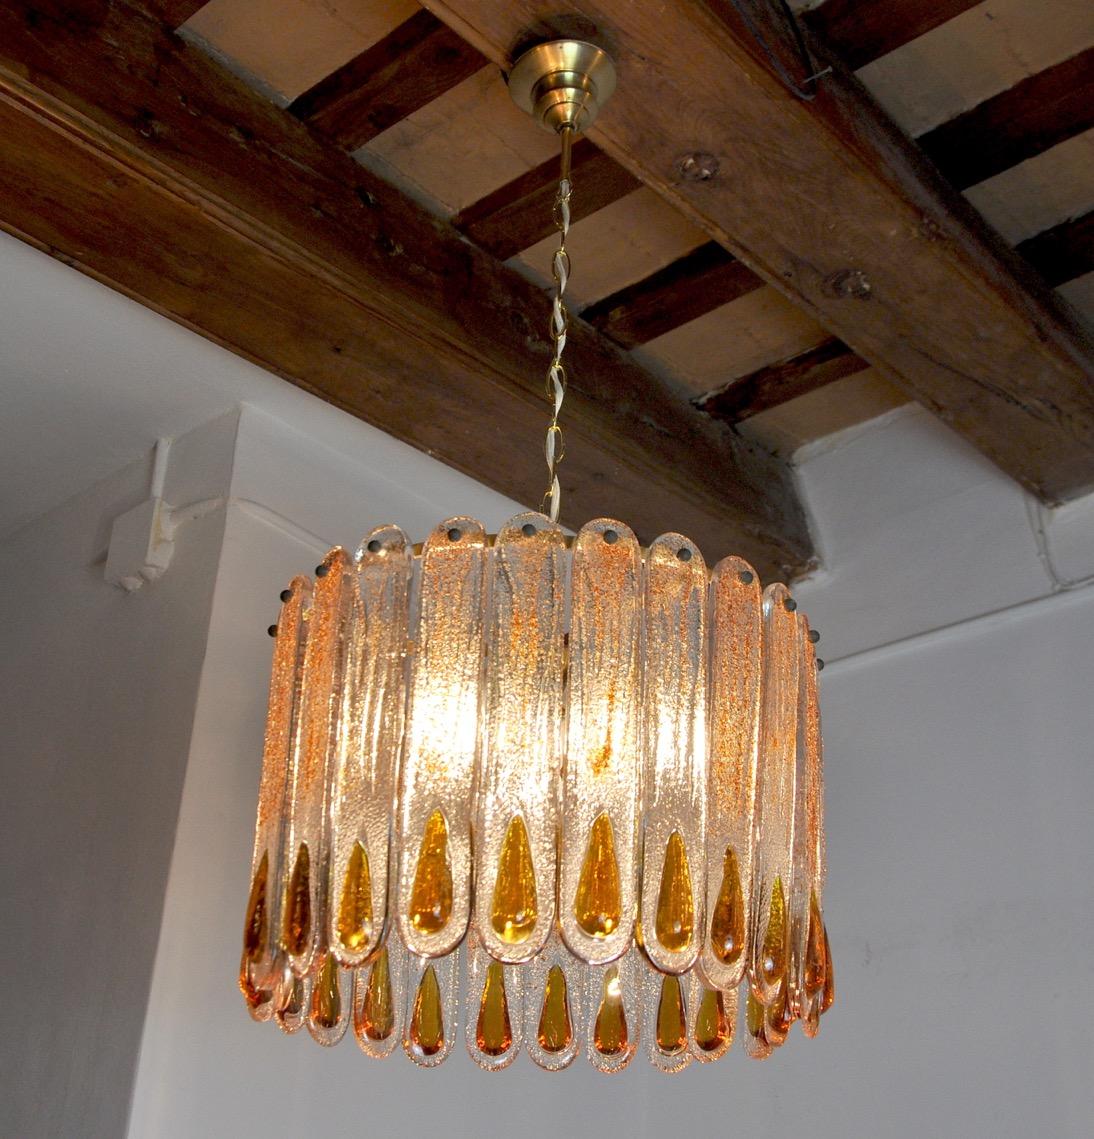 Rare and imposing murano mazzege chandelier designed and produced in murano, italy in the 60s. Golden metal structure composed of murano glass crystals, orange and frosted, in perfect condition, distributed in a circle. Unique design object that